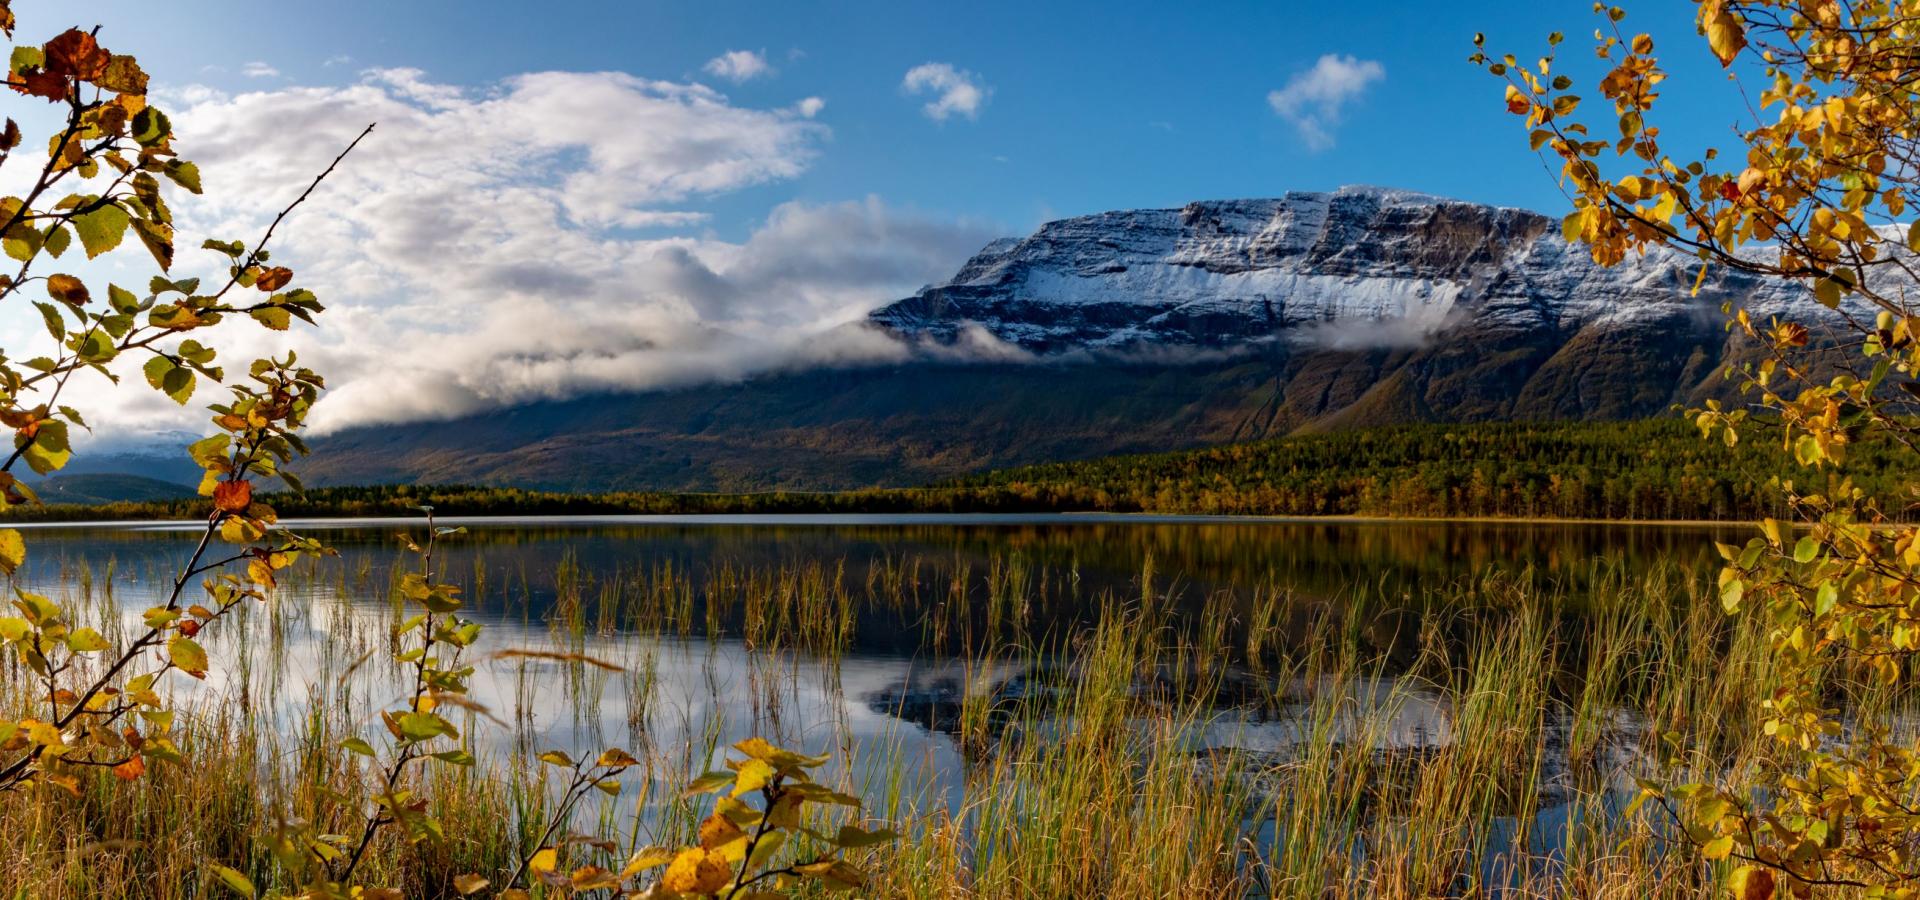 Lake with autumn leaves in the foreground and snowcapped mountains in the background